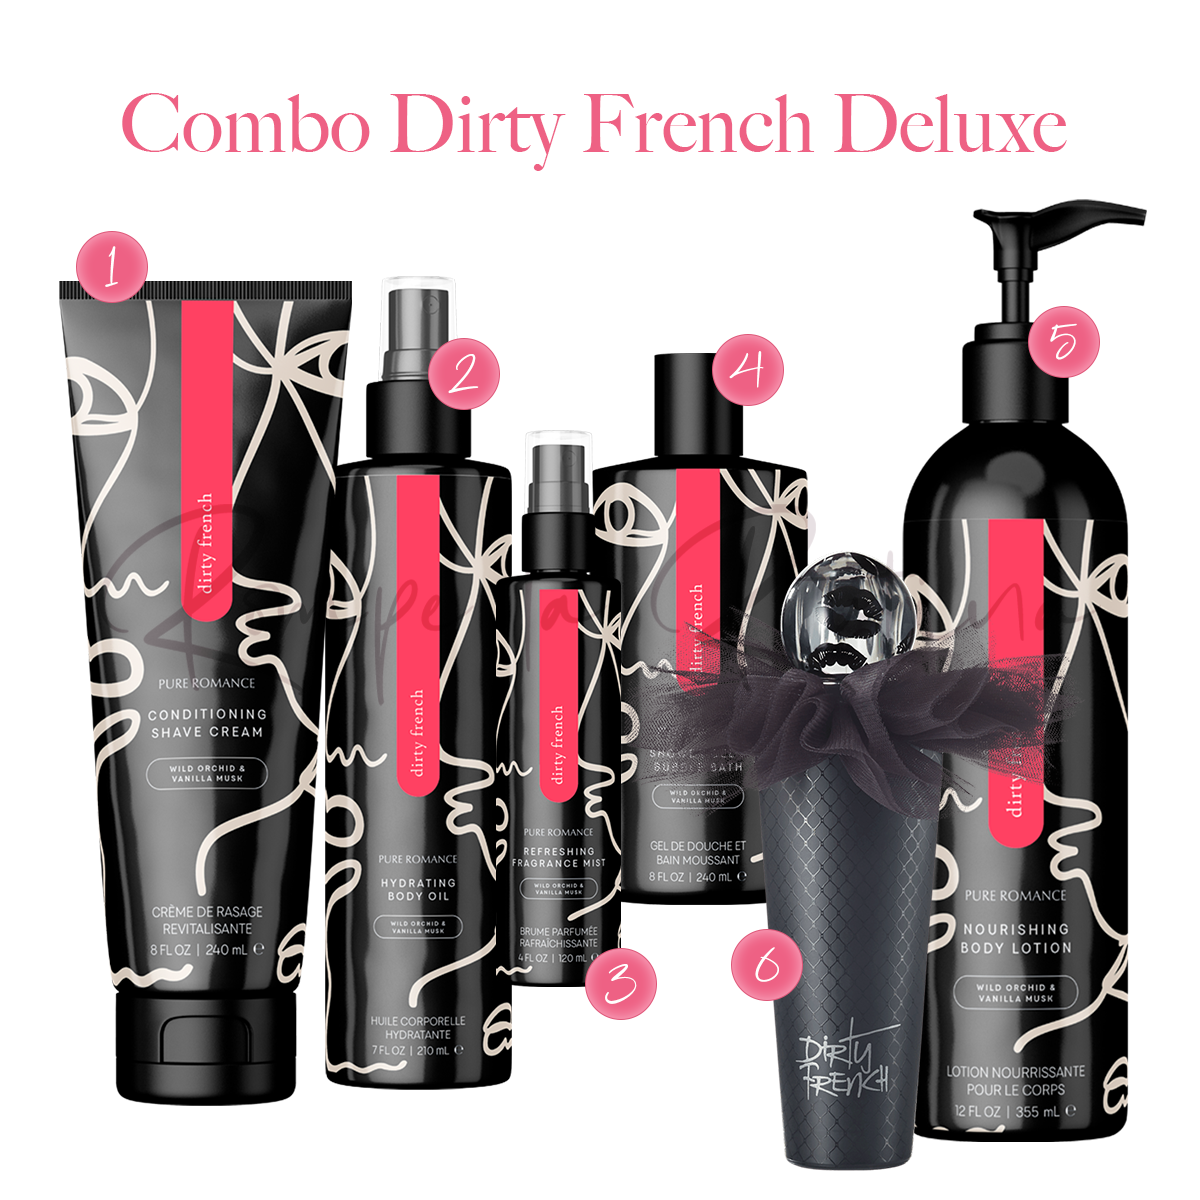 Combo Dirty French Deluxe